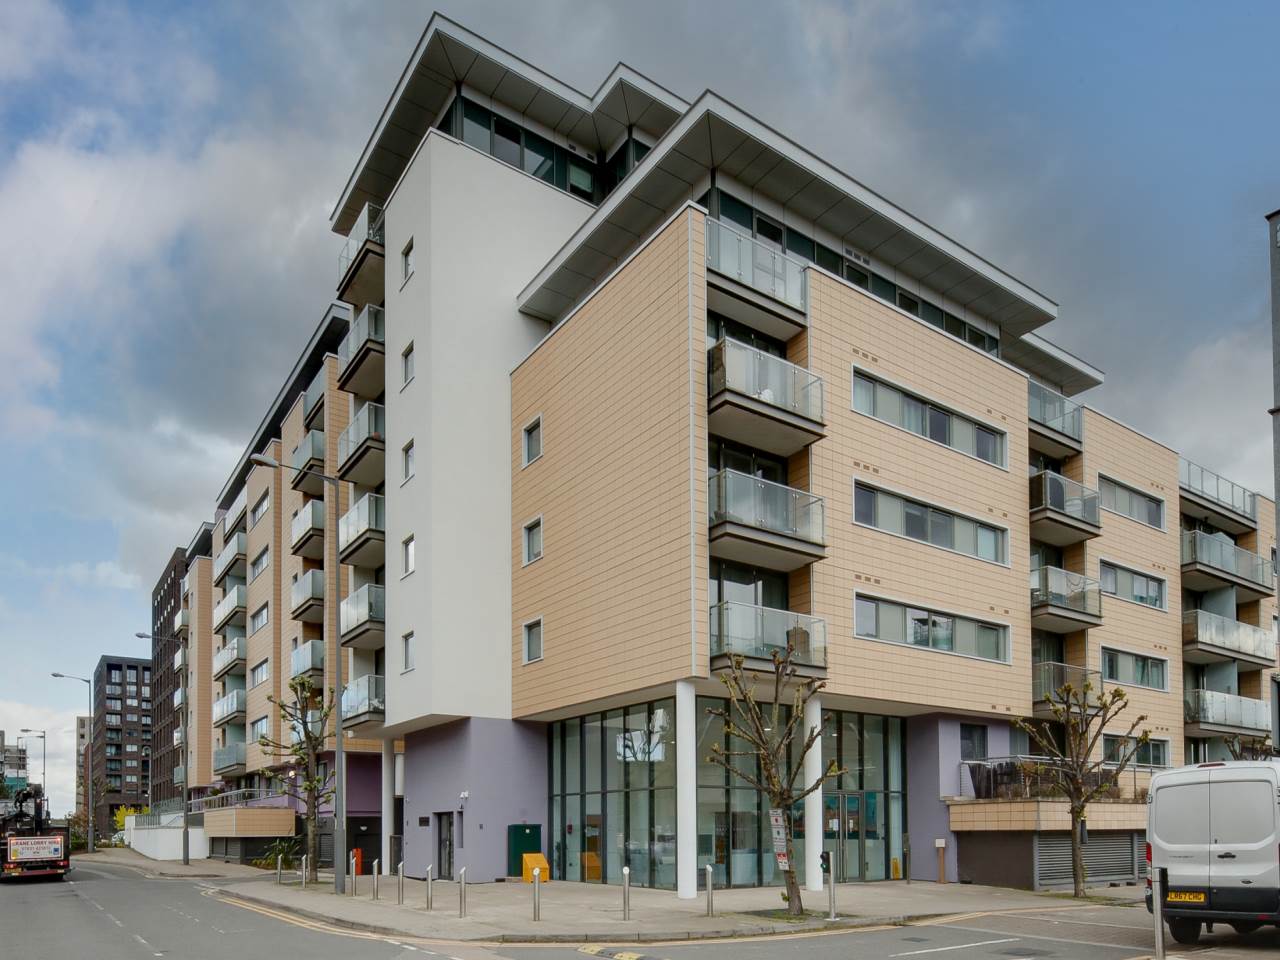 Lifestyle Property are delighted to offer this superb one bedroom apartment located within Royal Quay, just minutes walk to Gallions Reach DLR Station.Property consists of open plan kitchen and living room with Marina side facing balcony. Bedroom is a generous space with fitted wardrobes and window also side facing the Marina. Bathroom is fully tiled with bath and shower hose. Hallway houses storage cupboard as well as washing machine. Wooden flooring throughout whole property.Royal Quay as a development includes 24 hour concierge, gym, restaurant and convenience store.Year remaining on lease: 178
Annual service charge: Approx. £3900.00
Annual ground rent: Approx. £800.00